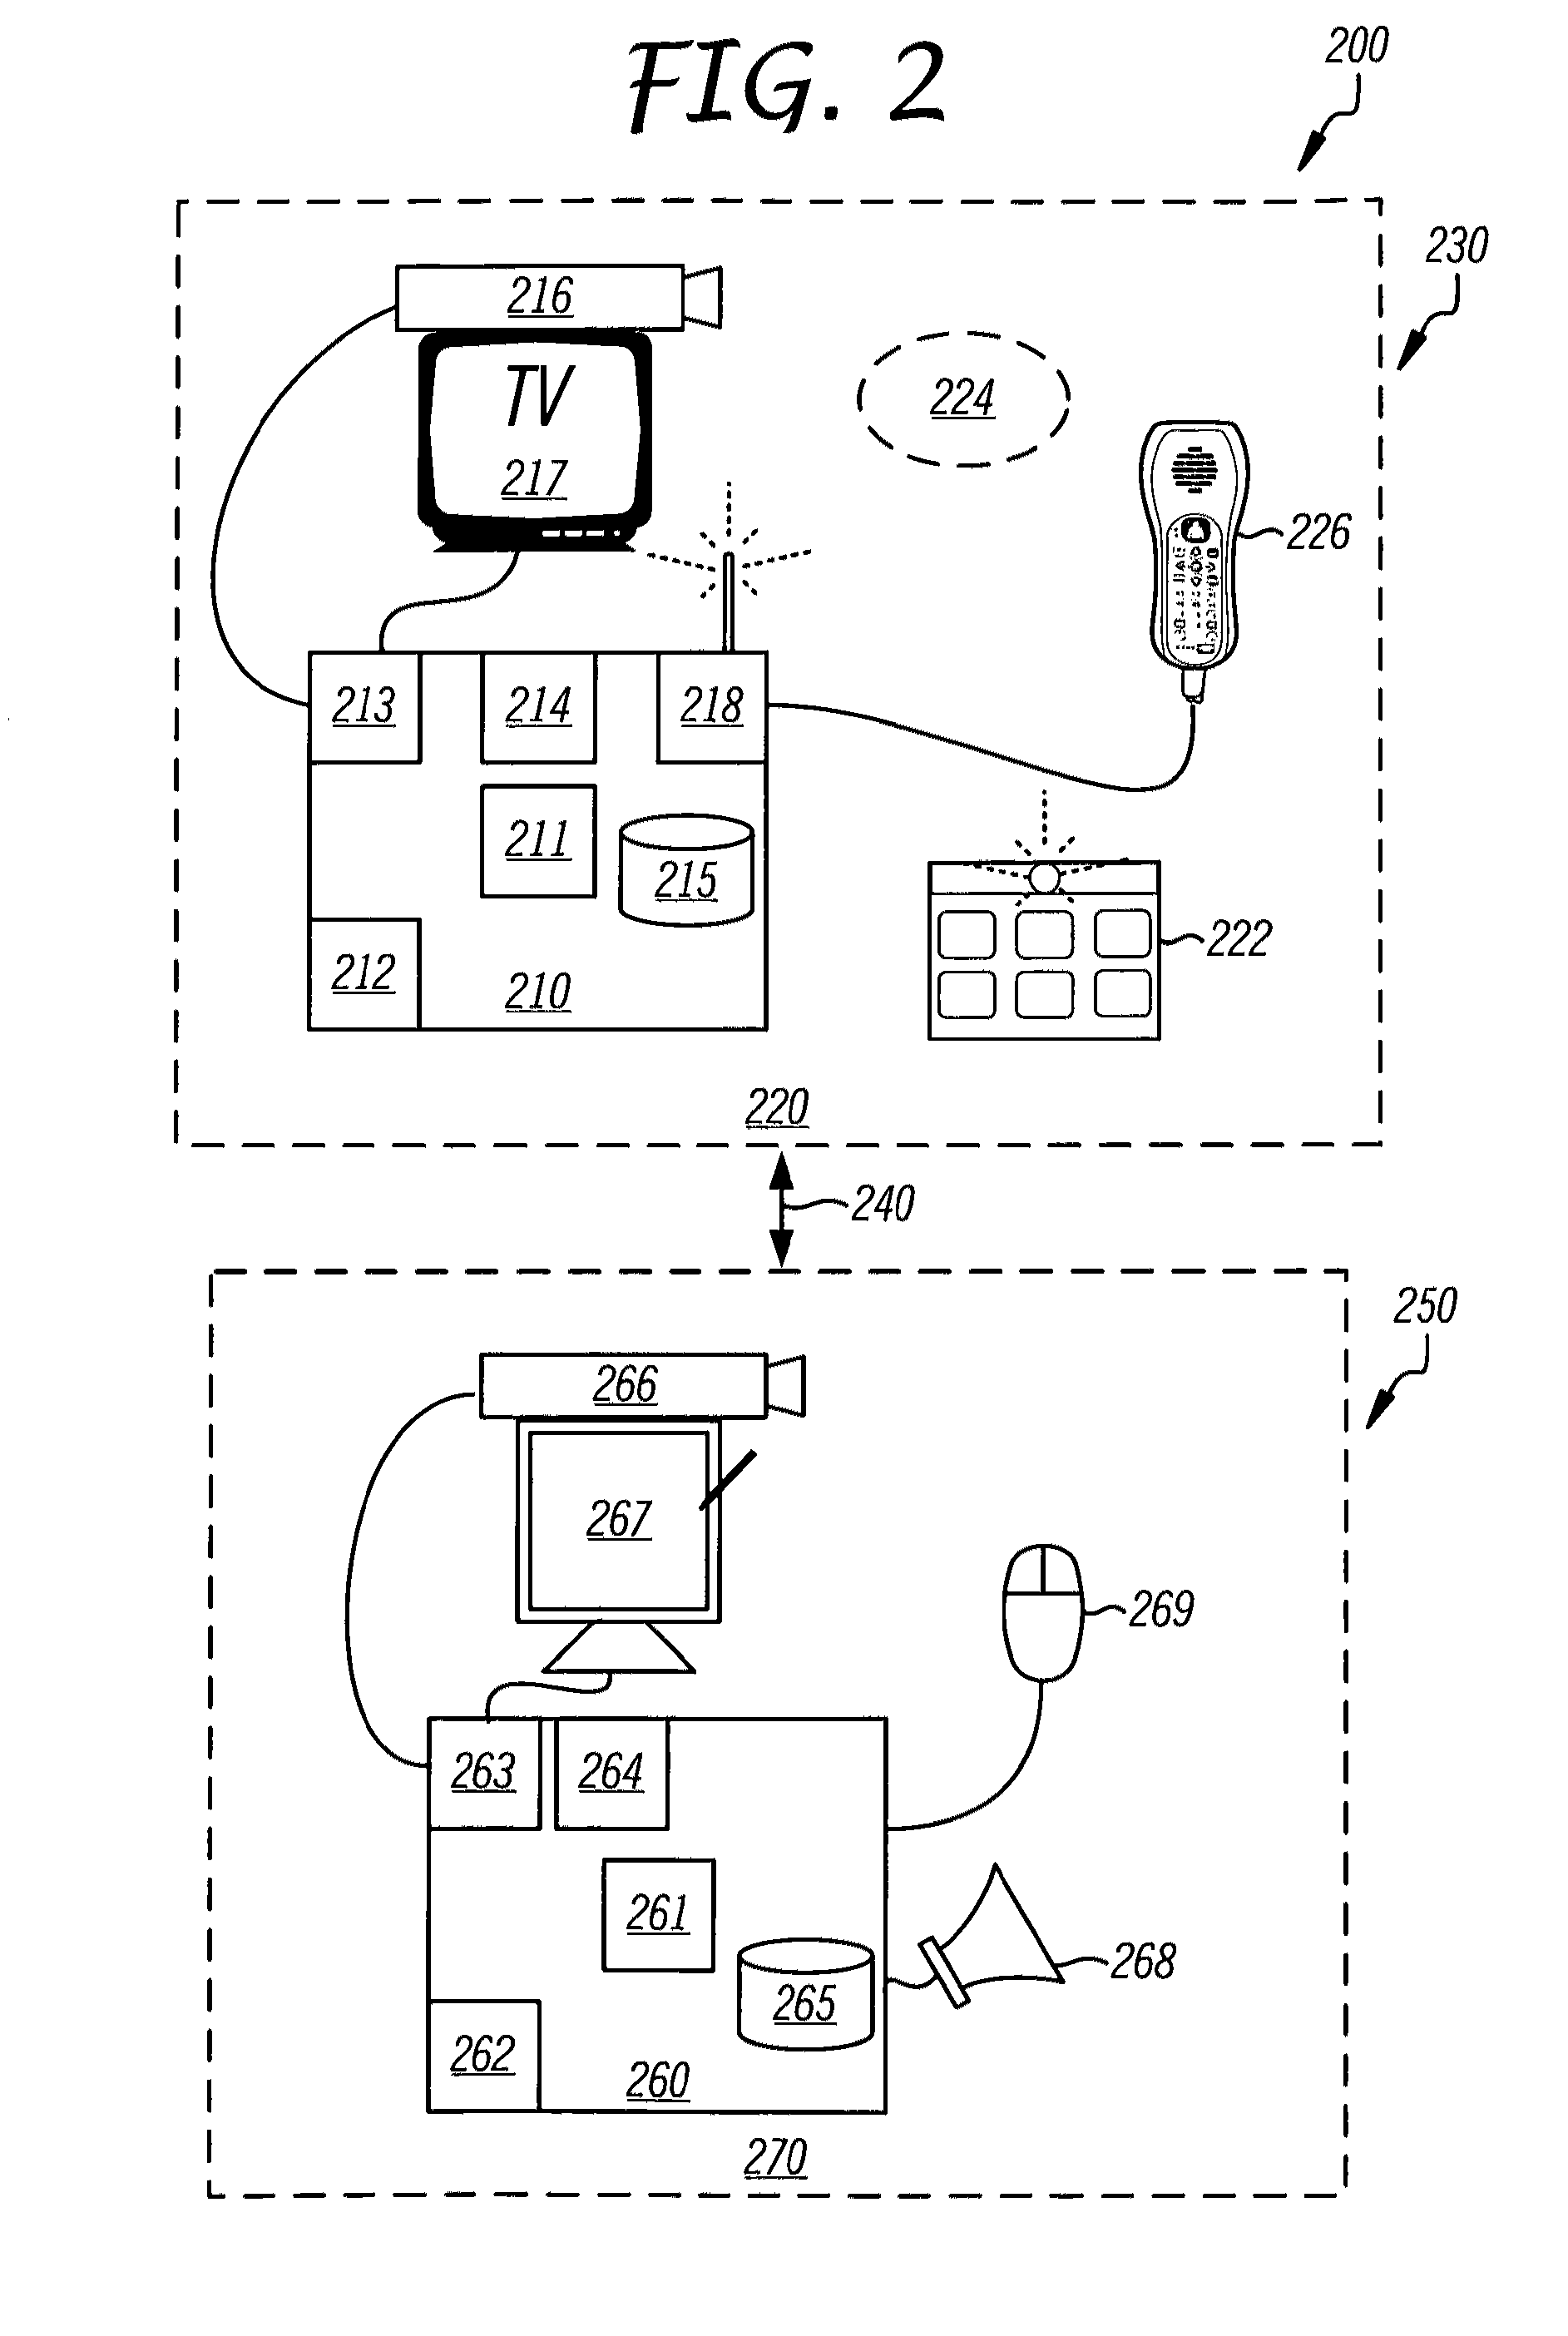 System and method for using a video monitoring system to prevent and manage decubitus ulcers in patients